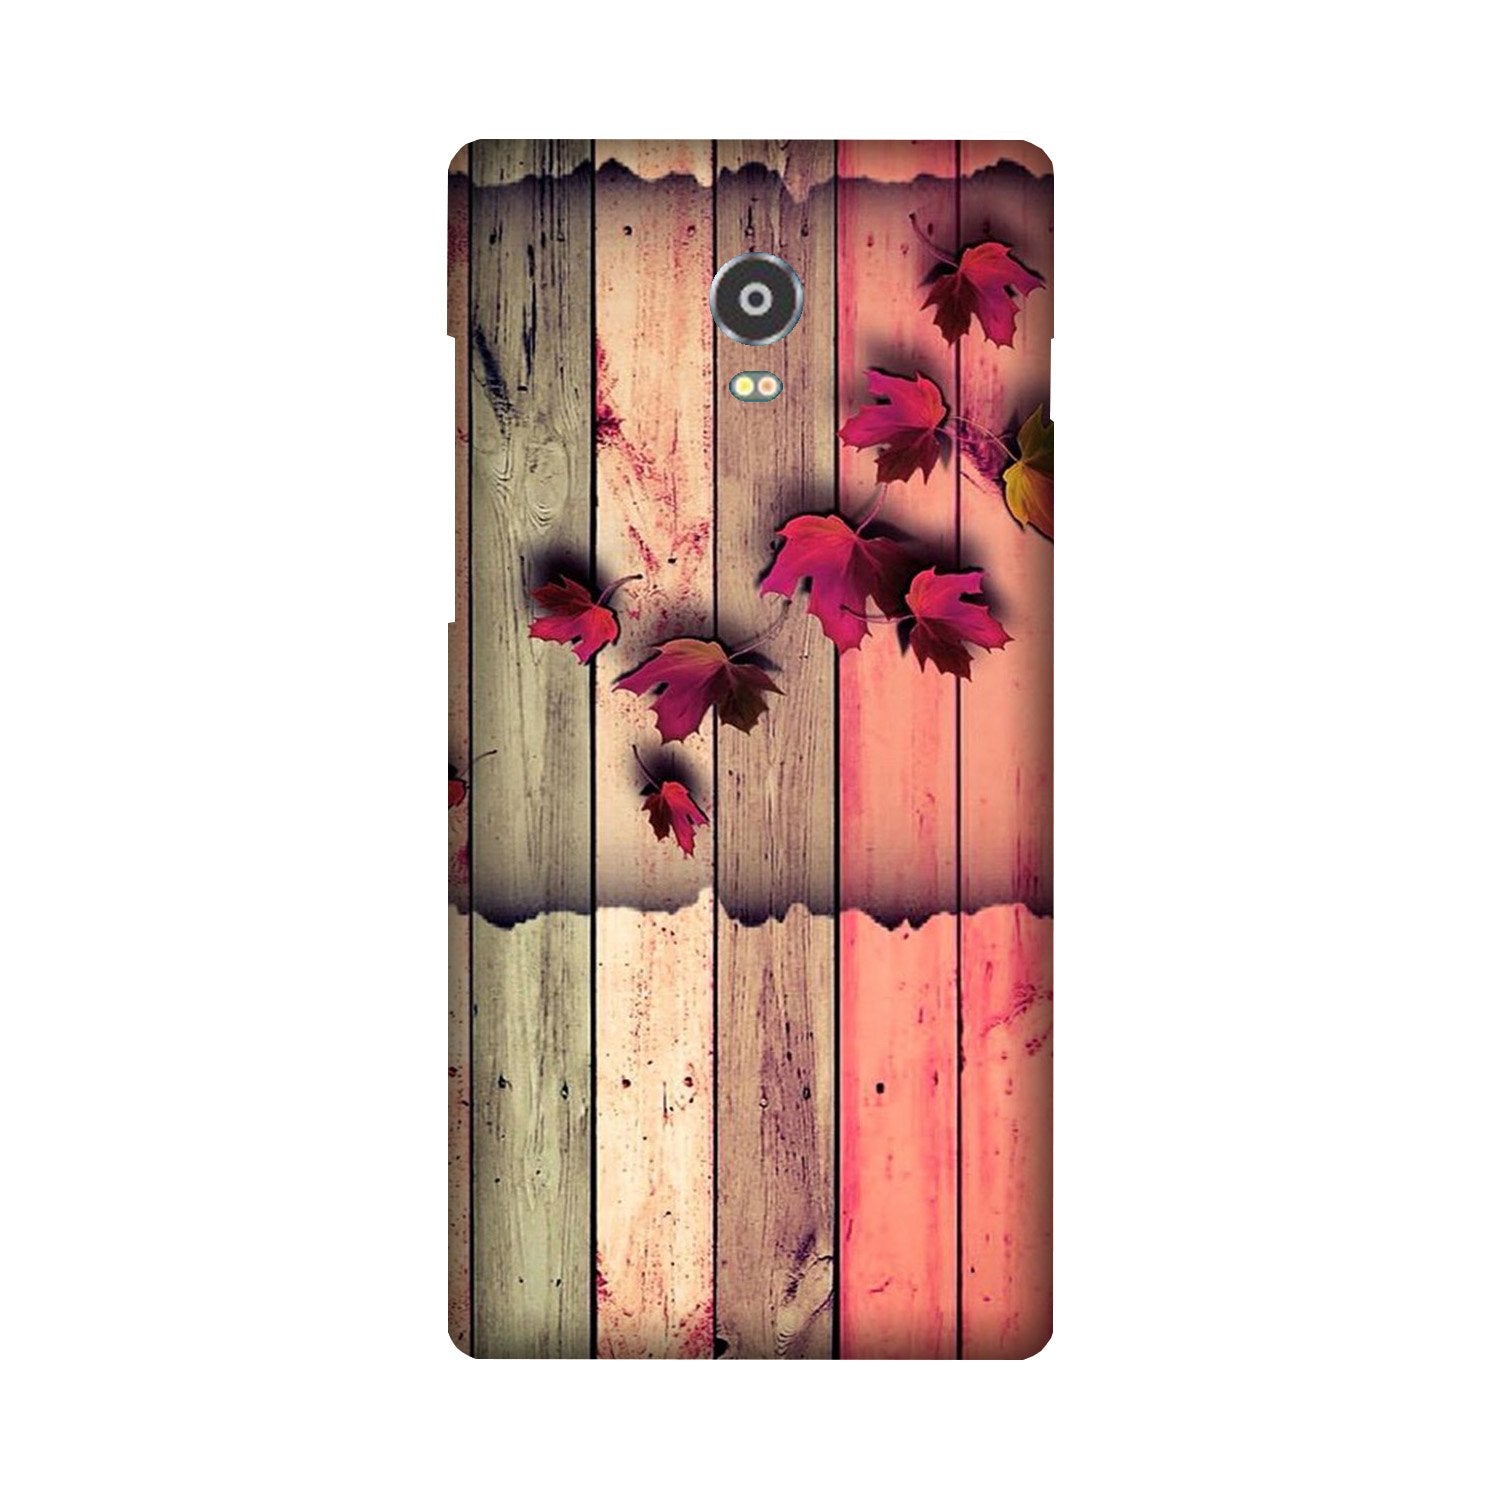 Wooden look2 Case for Lenovo Vibe P1